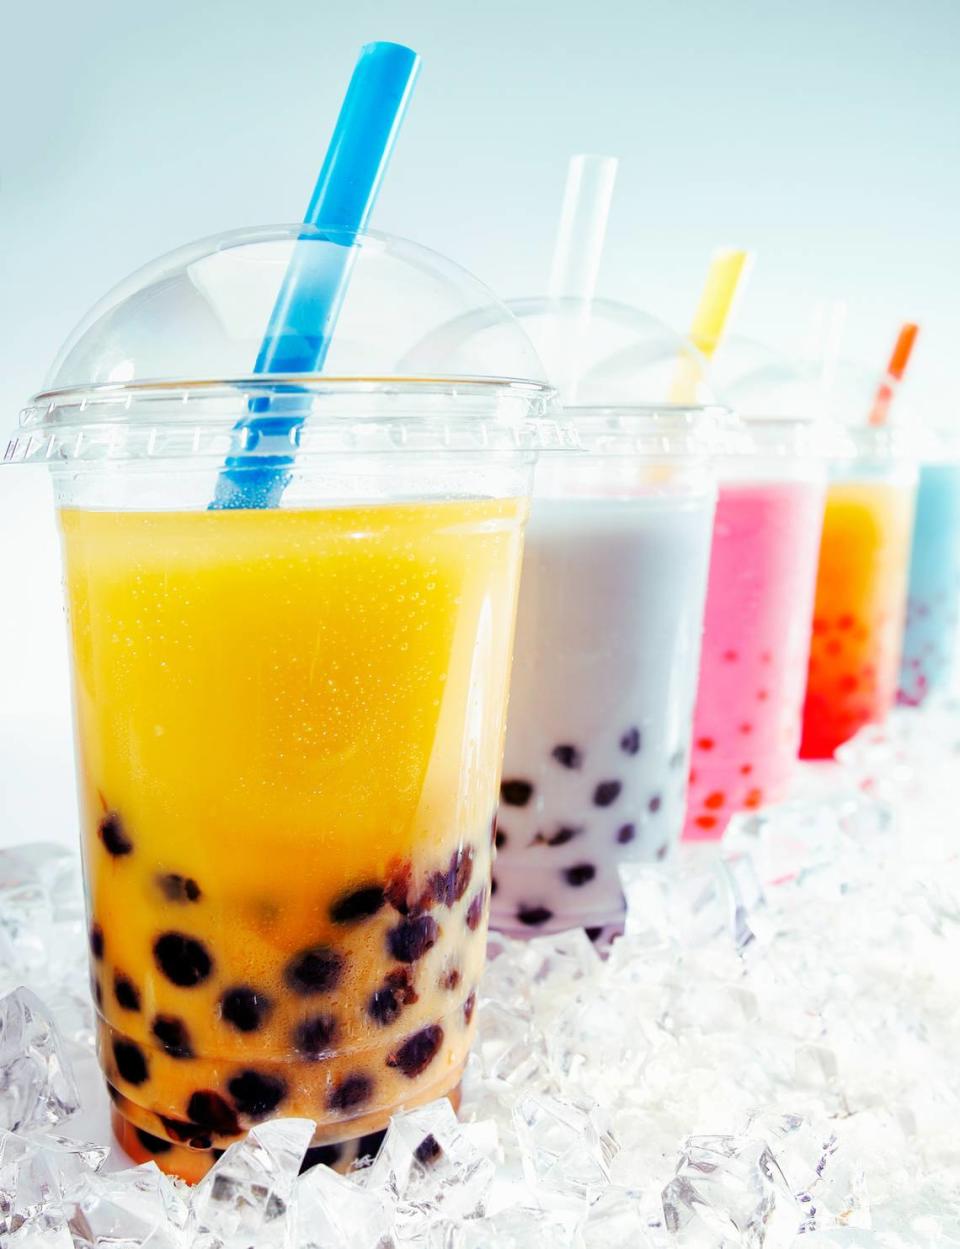 Assorted fruity boba tea cocktails. Boba, also known as bubble tea, originated in Taiwan in the 1980s and arrived in the U.S. a decade later. But there has been a boba shortage, forcing area boba tea shops to be flexible.